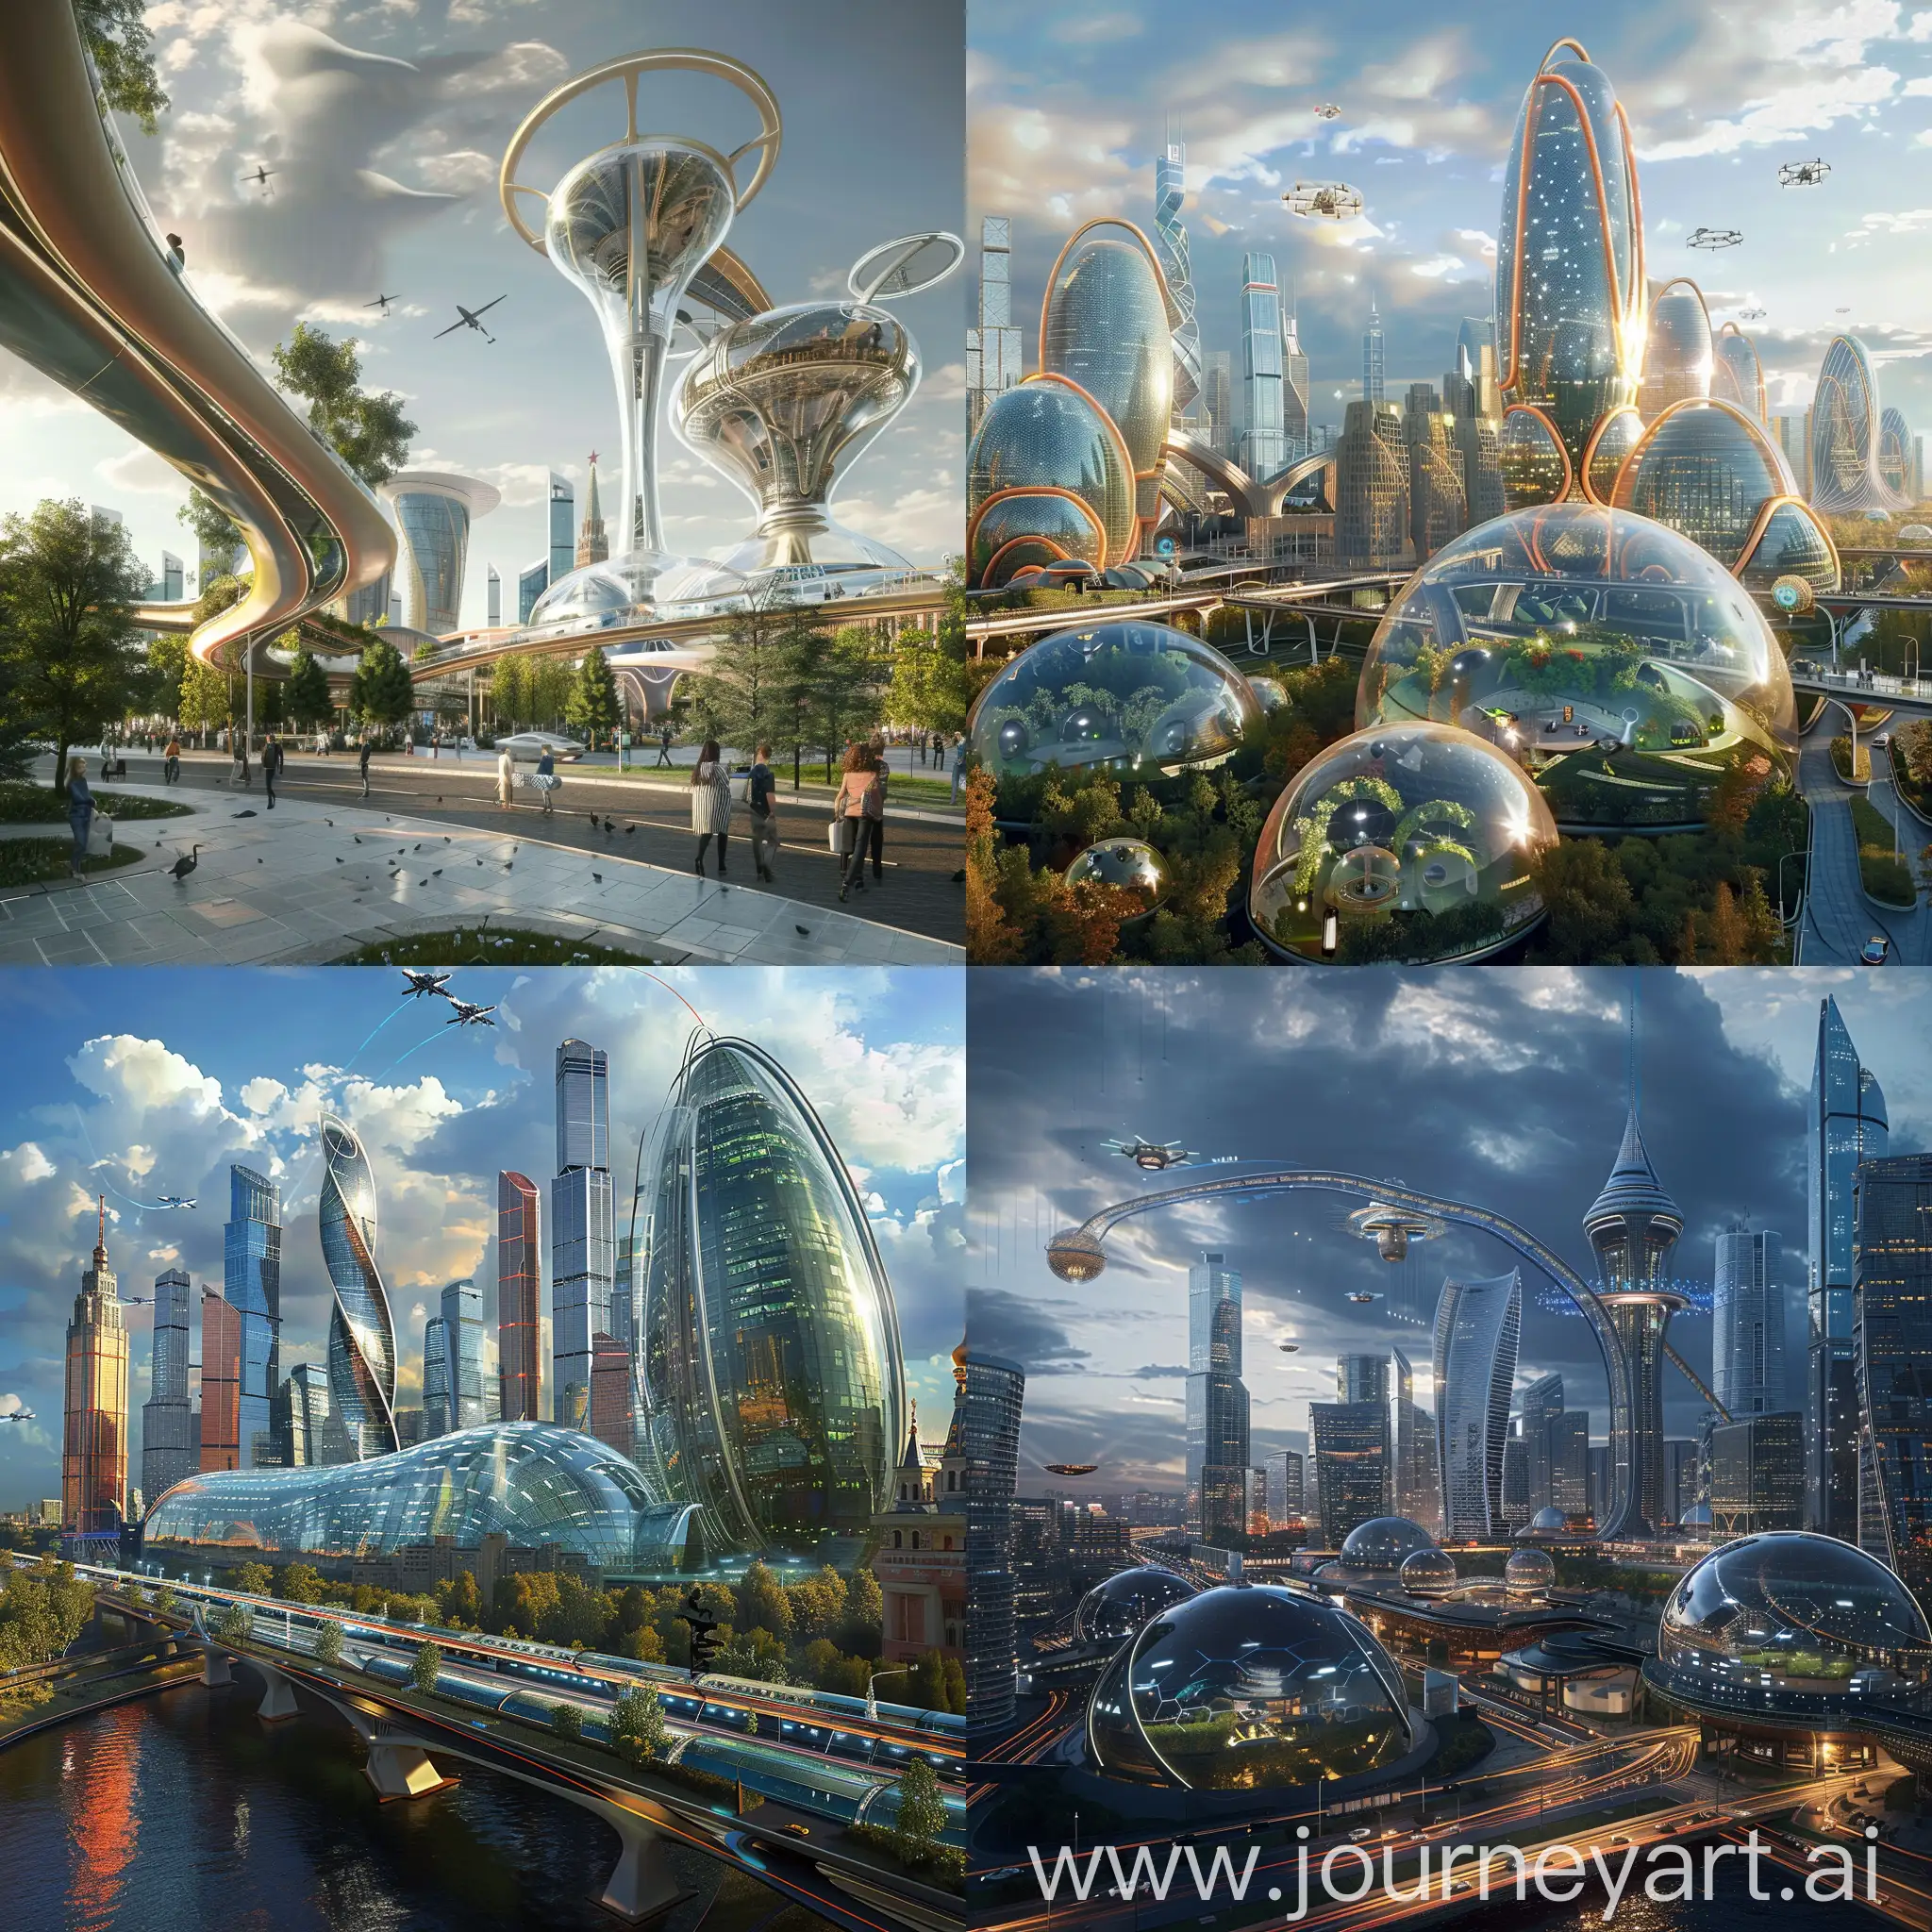 Sci-Fi Moscow, Advanced Science and Technology, Aerodynamic Domes, Smart Roads, Vertical Farms, Drone Delivery Ports, Modular Apartments, Energy Harnessing Buildings, Hyperloop Transit Systems, AI-Managed Waste Disposal, Augmented Reality Navigation, Climate Control Towers, Interactive Facades, Eco-Bridges, Atmospheric Purifiers, Floating Public Spaces, Dynamic Sculptures, Holographic Signage, Light Harvesting Network, Transportation Hubs, Urban Wildlife Corridors, Weather Modification Drones, in Unreal Engine 5 Style --stylize 1000